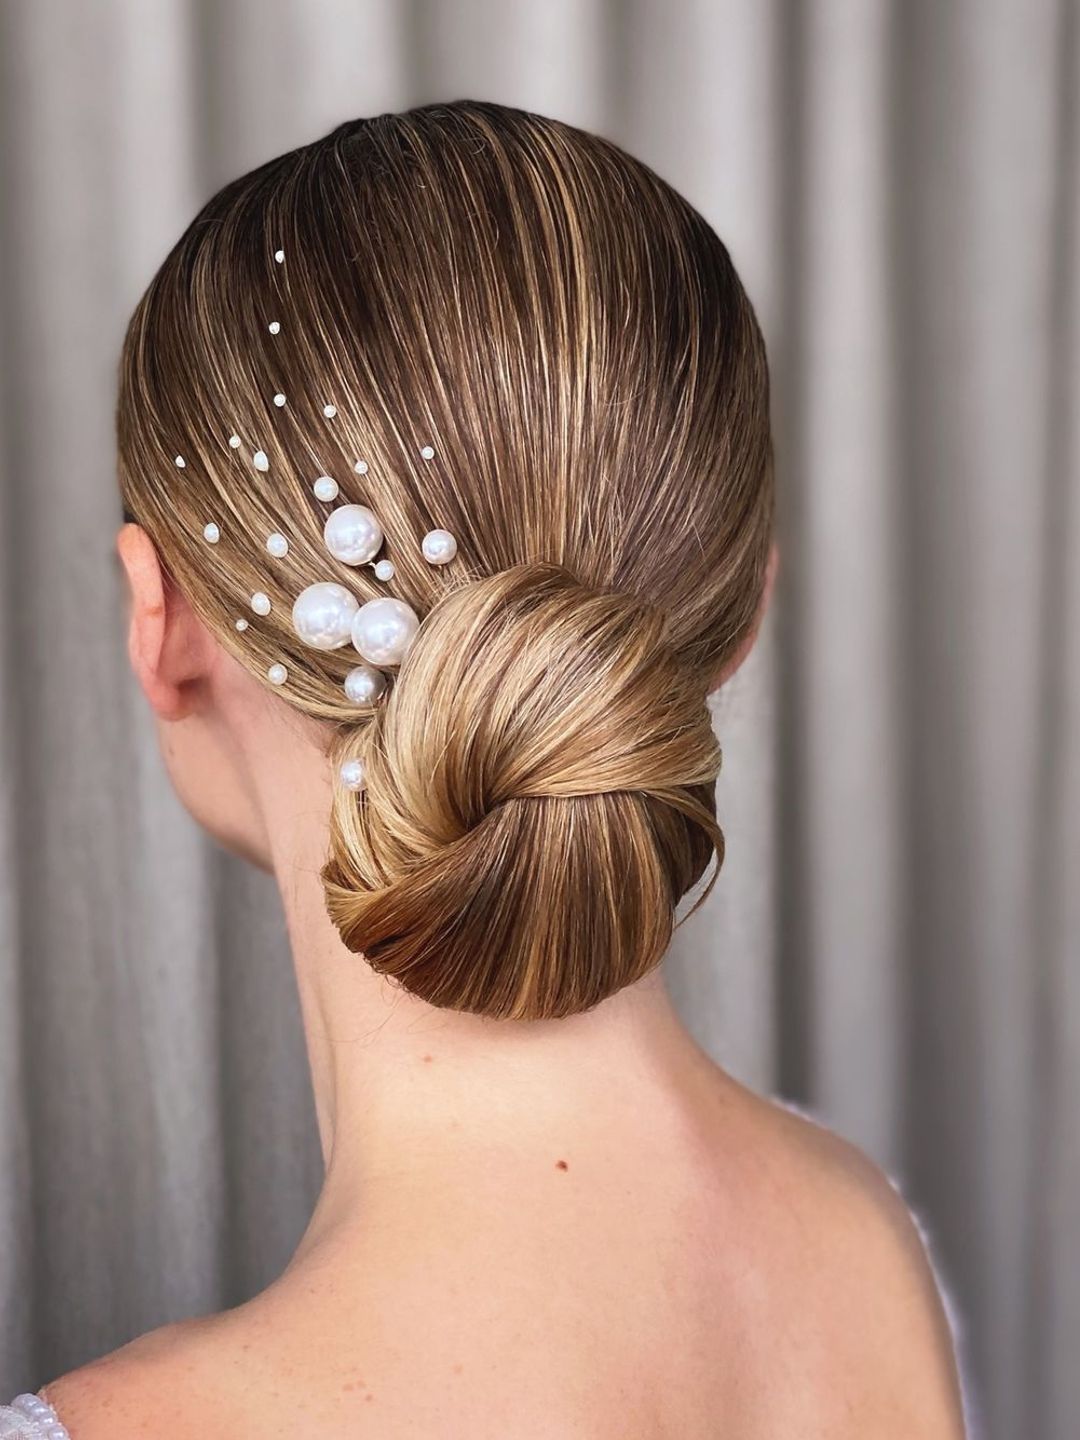 Hair in a bun with pearl accents 